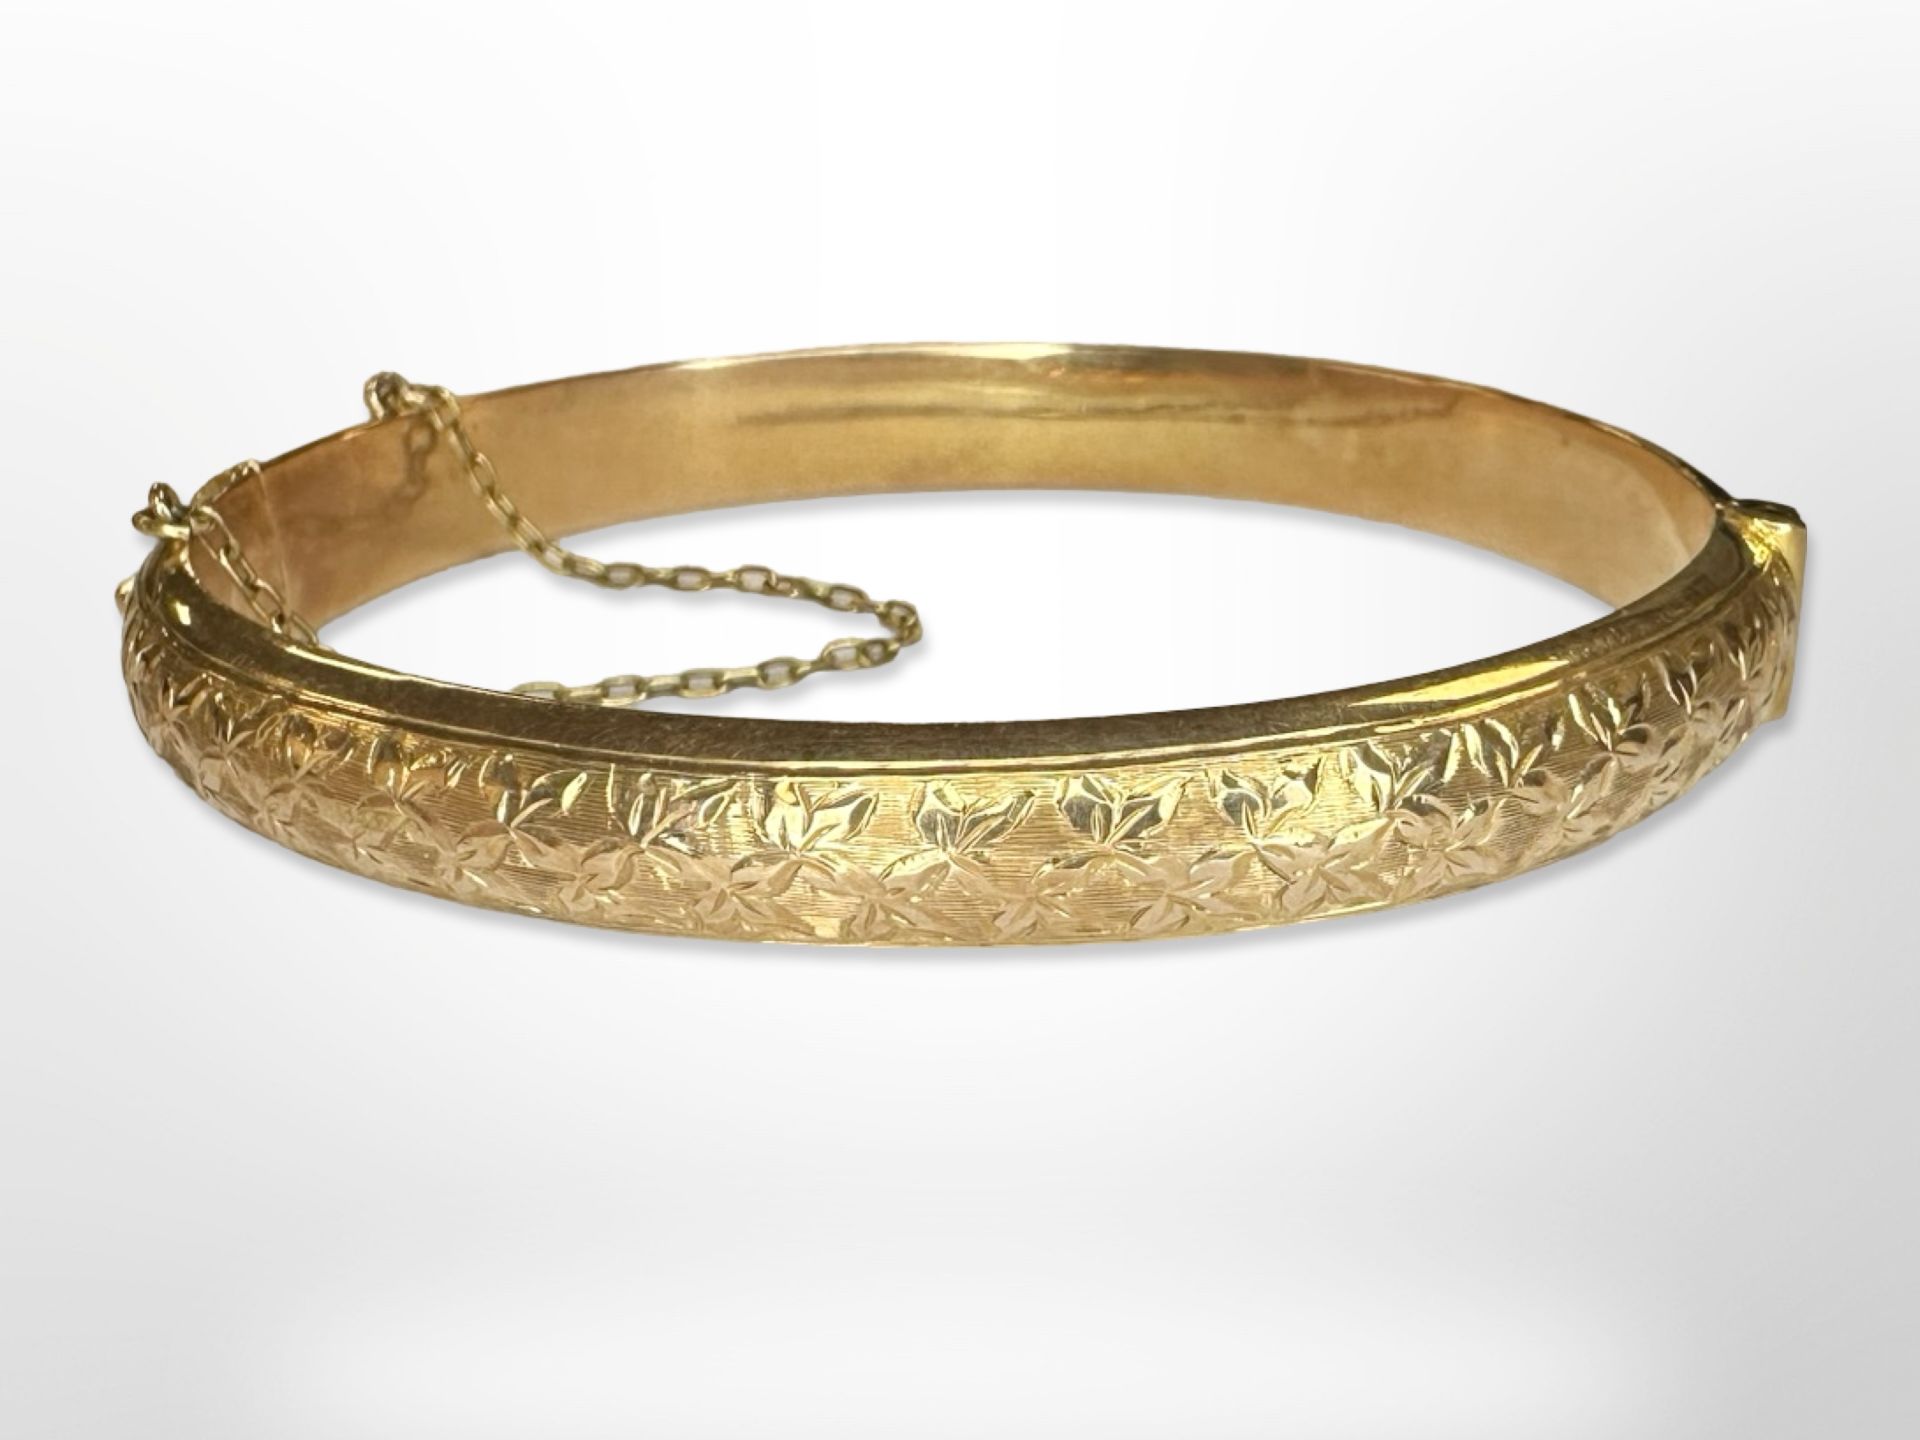 An antique 15ct yellow gold bangle, with lightly engraved floral decoration, internally 6 cm x 5 cm.